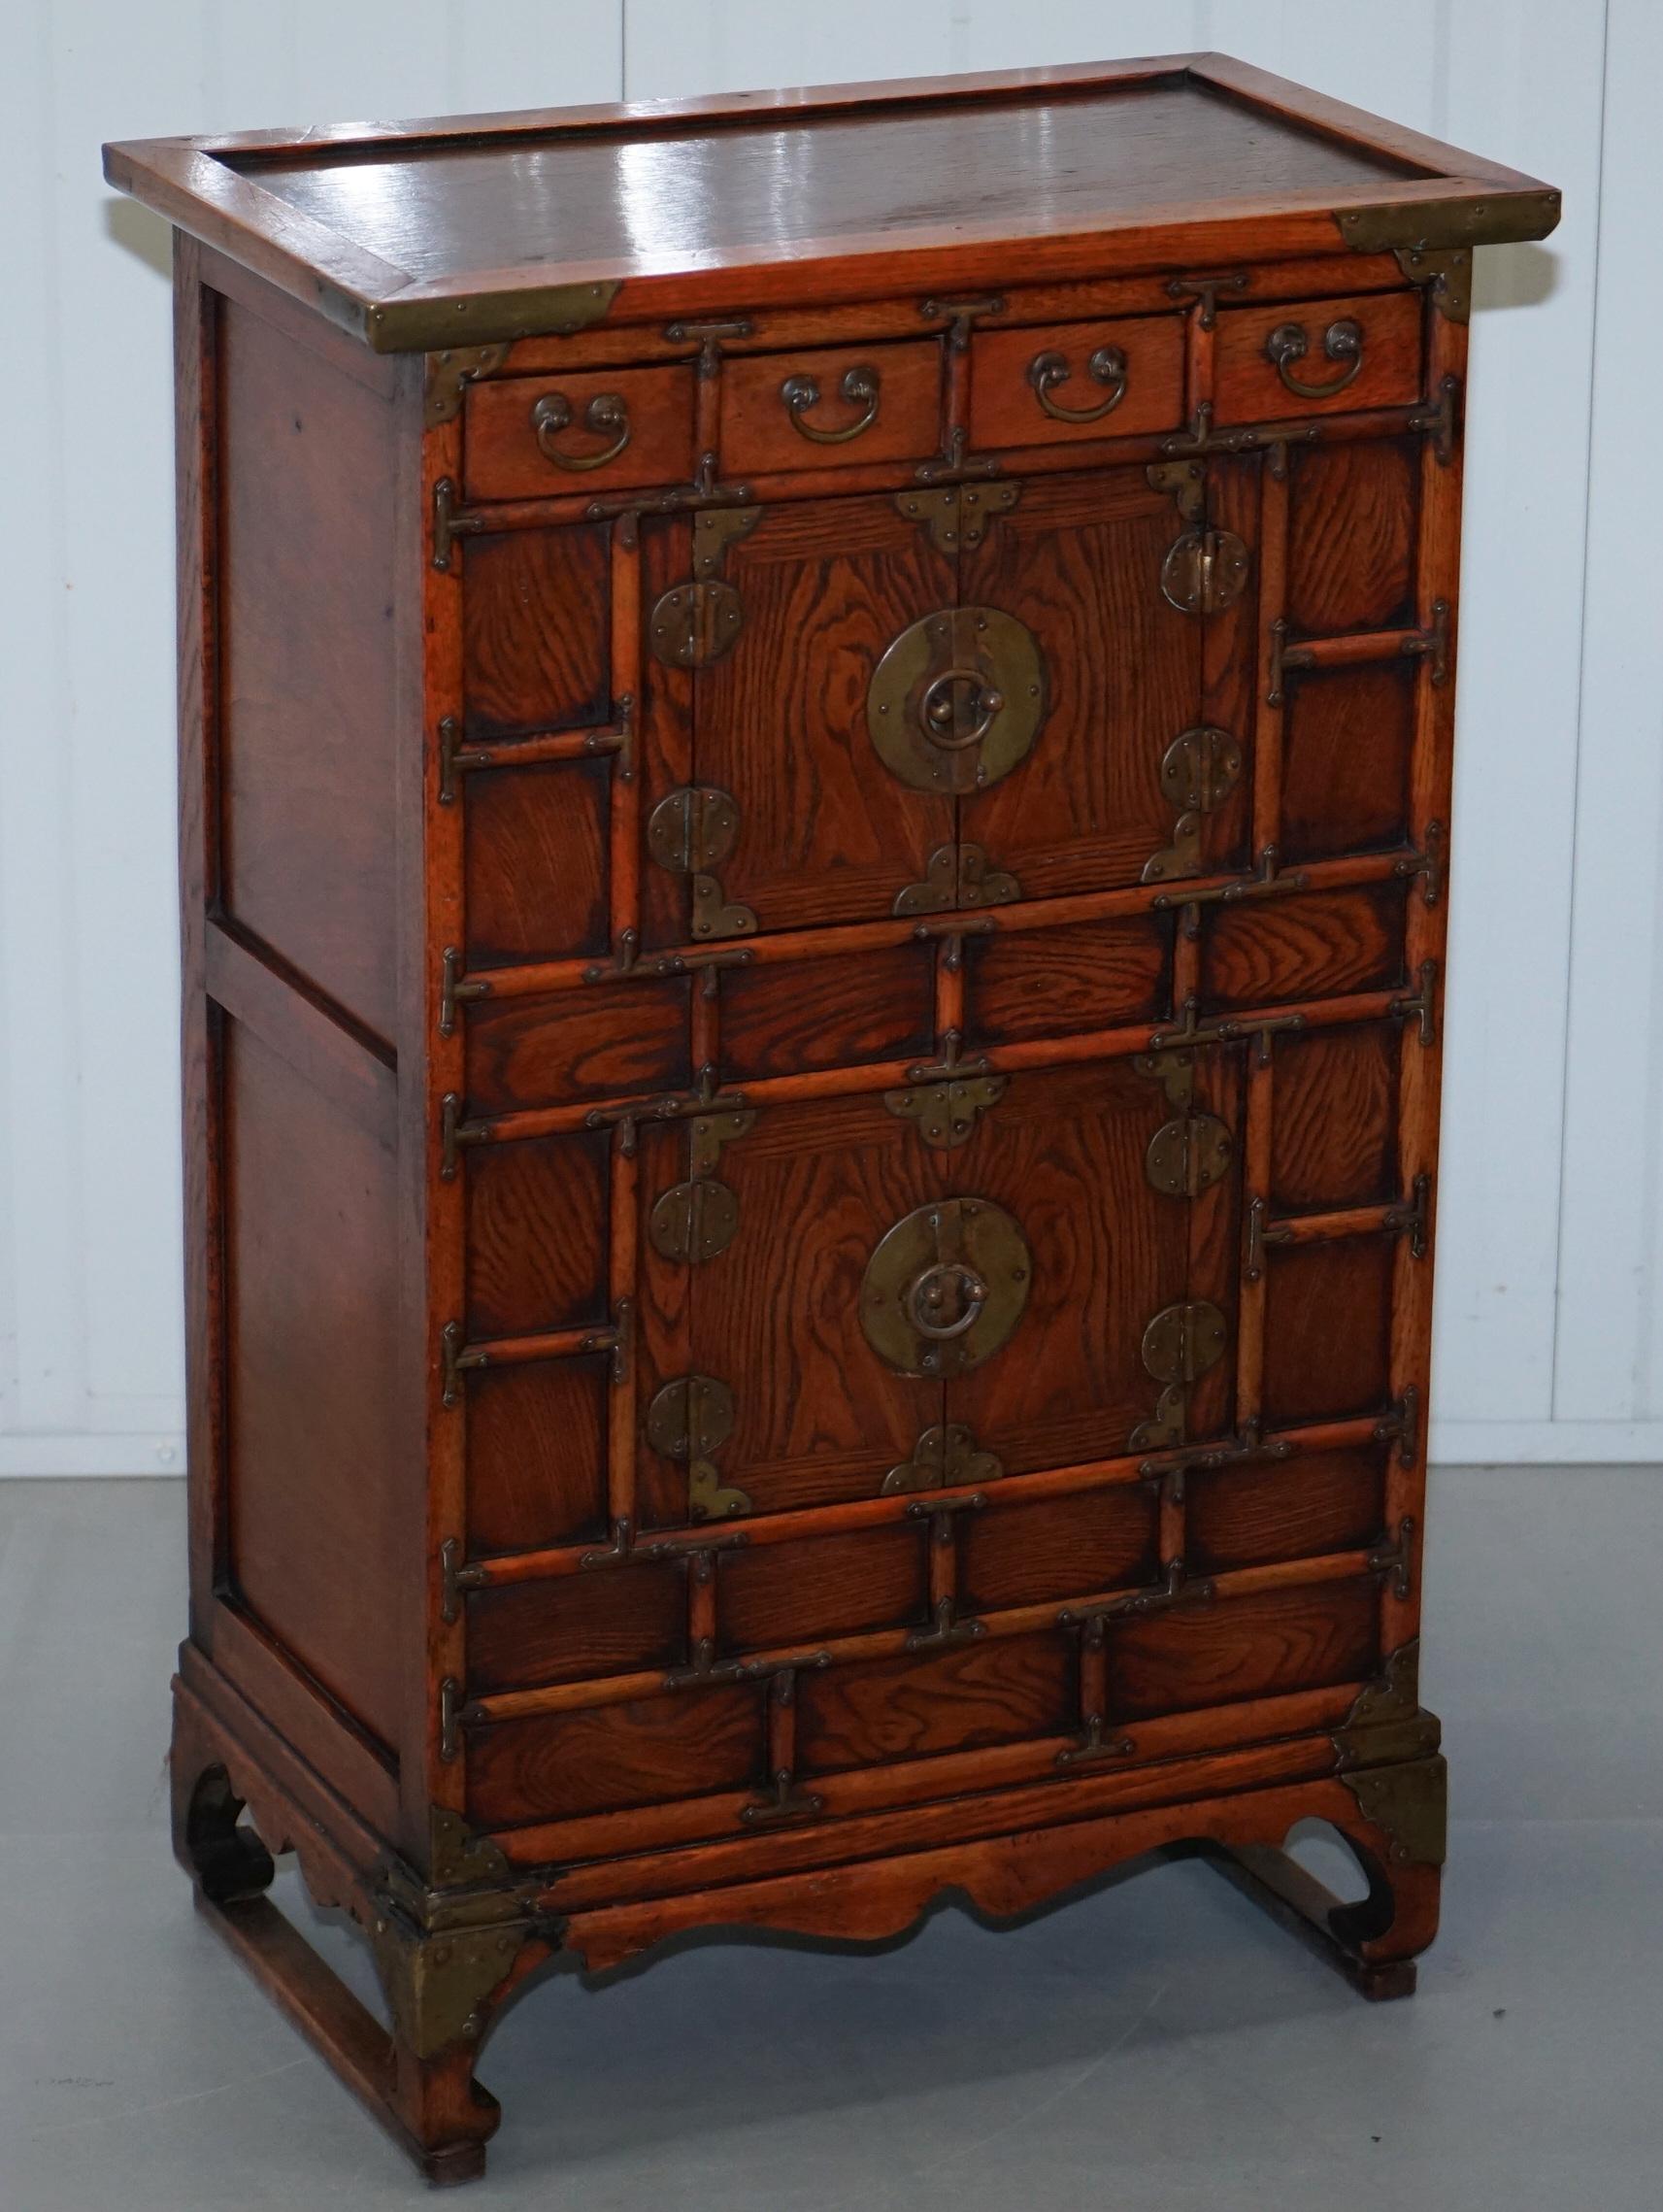 We are delighted to offer for sale this lovely pair of antique Chinese hand-carved in tiger oak alter cabinets with drawers

A very good looking and well-made pair, dated to circa 1920 and most certainly made for the export market, three of the